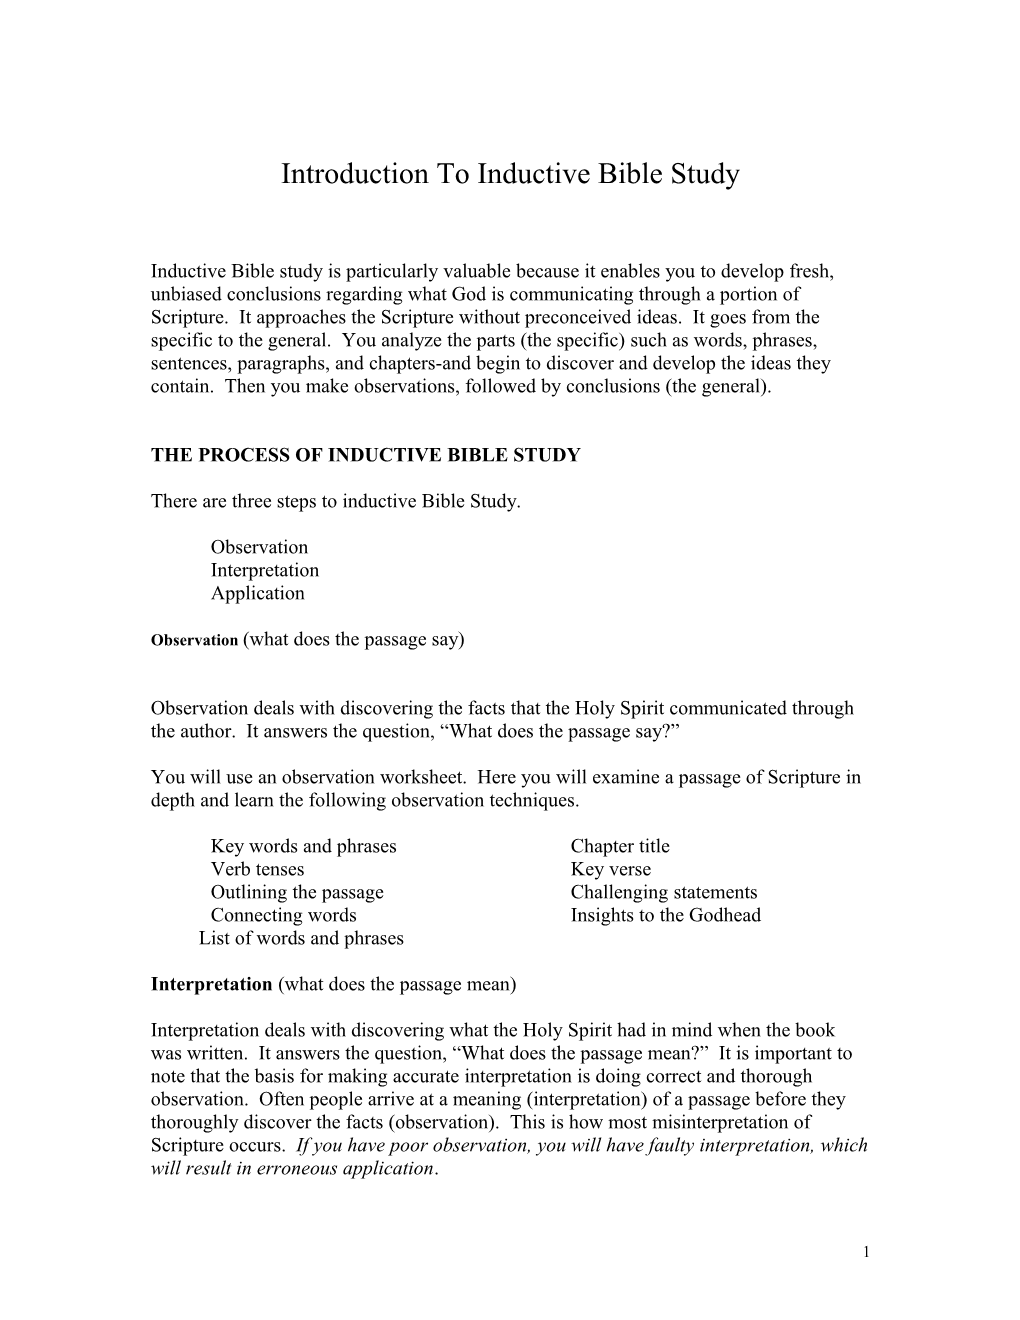 Introduction to Inductive Bible Study